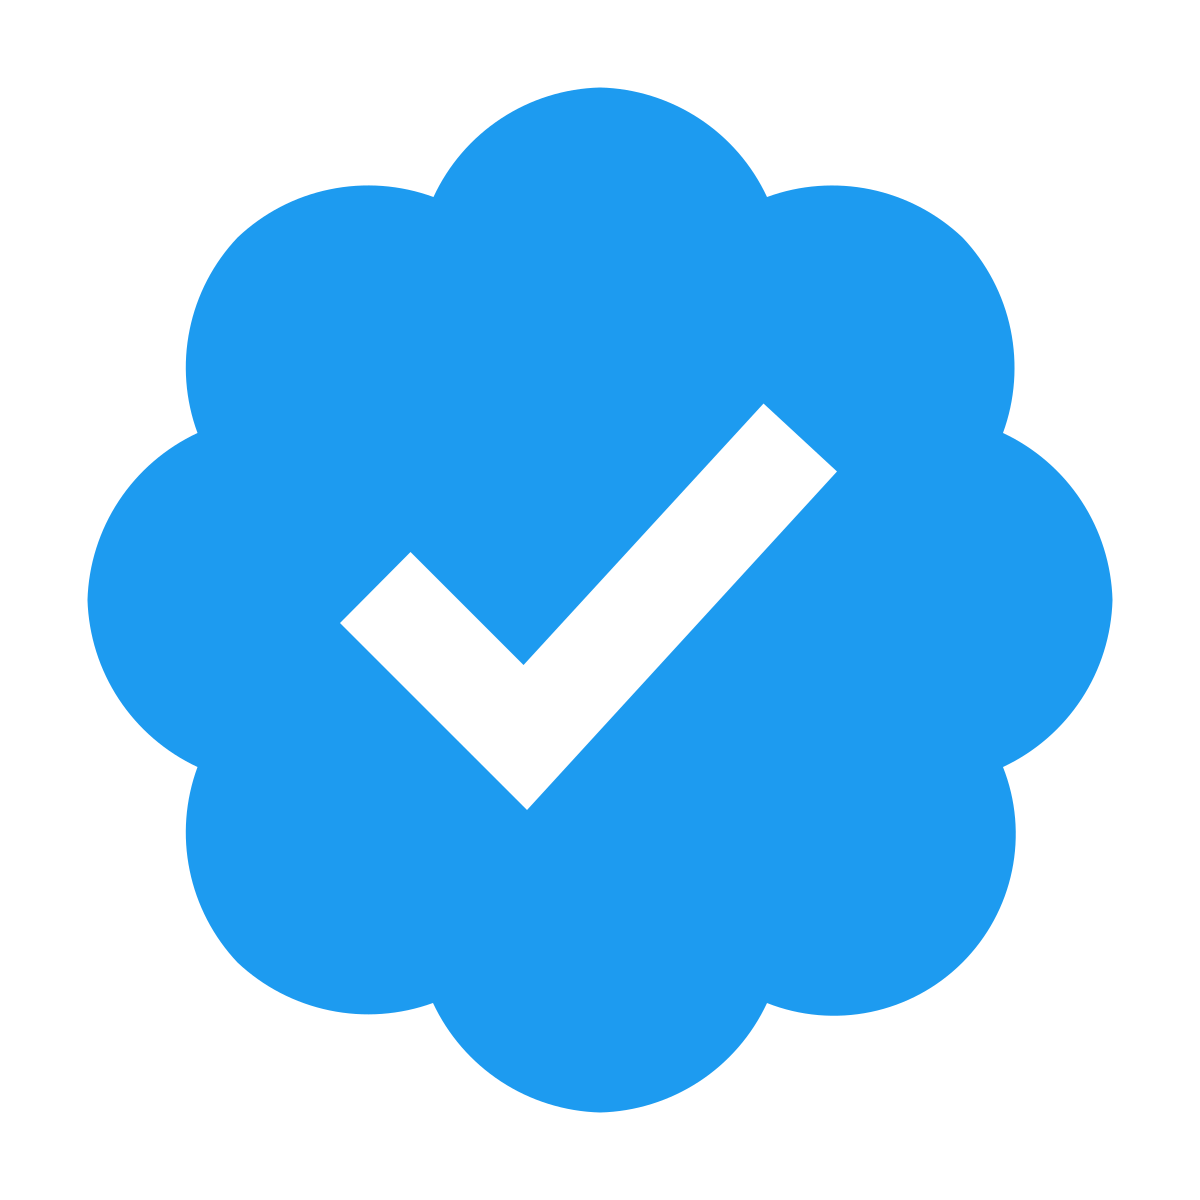 Today, Twitter X conferred me with the blue tick, without any payment @FedicaHQ